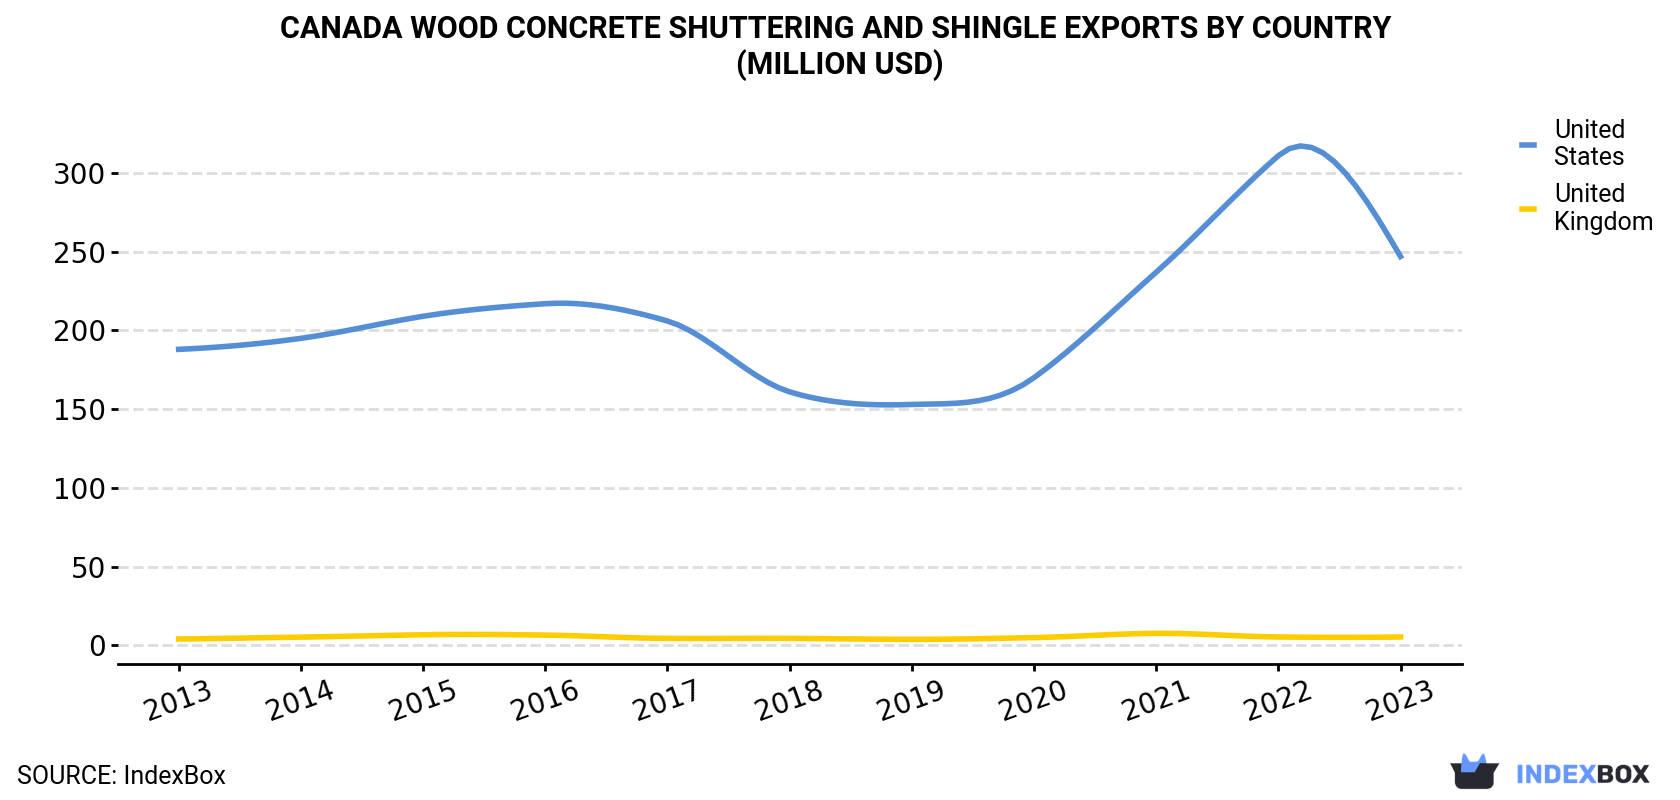 Canada Wood Concrete Shuttering and Shingle Exports By Country (Million USD)